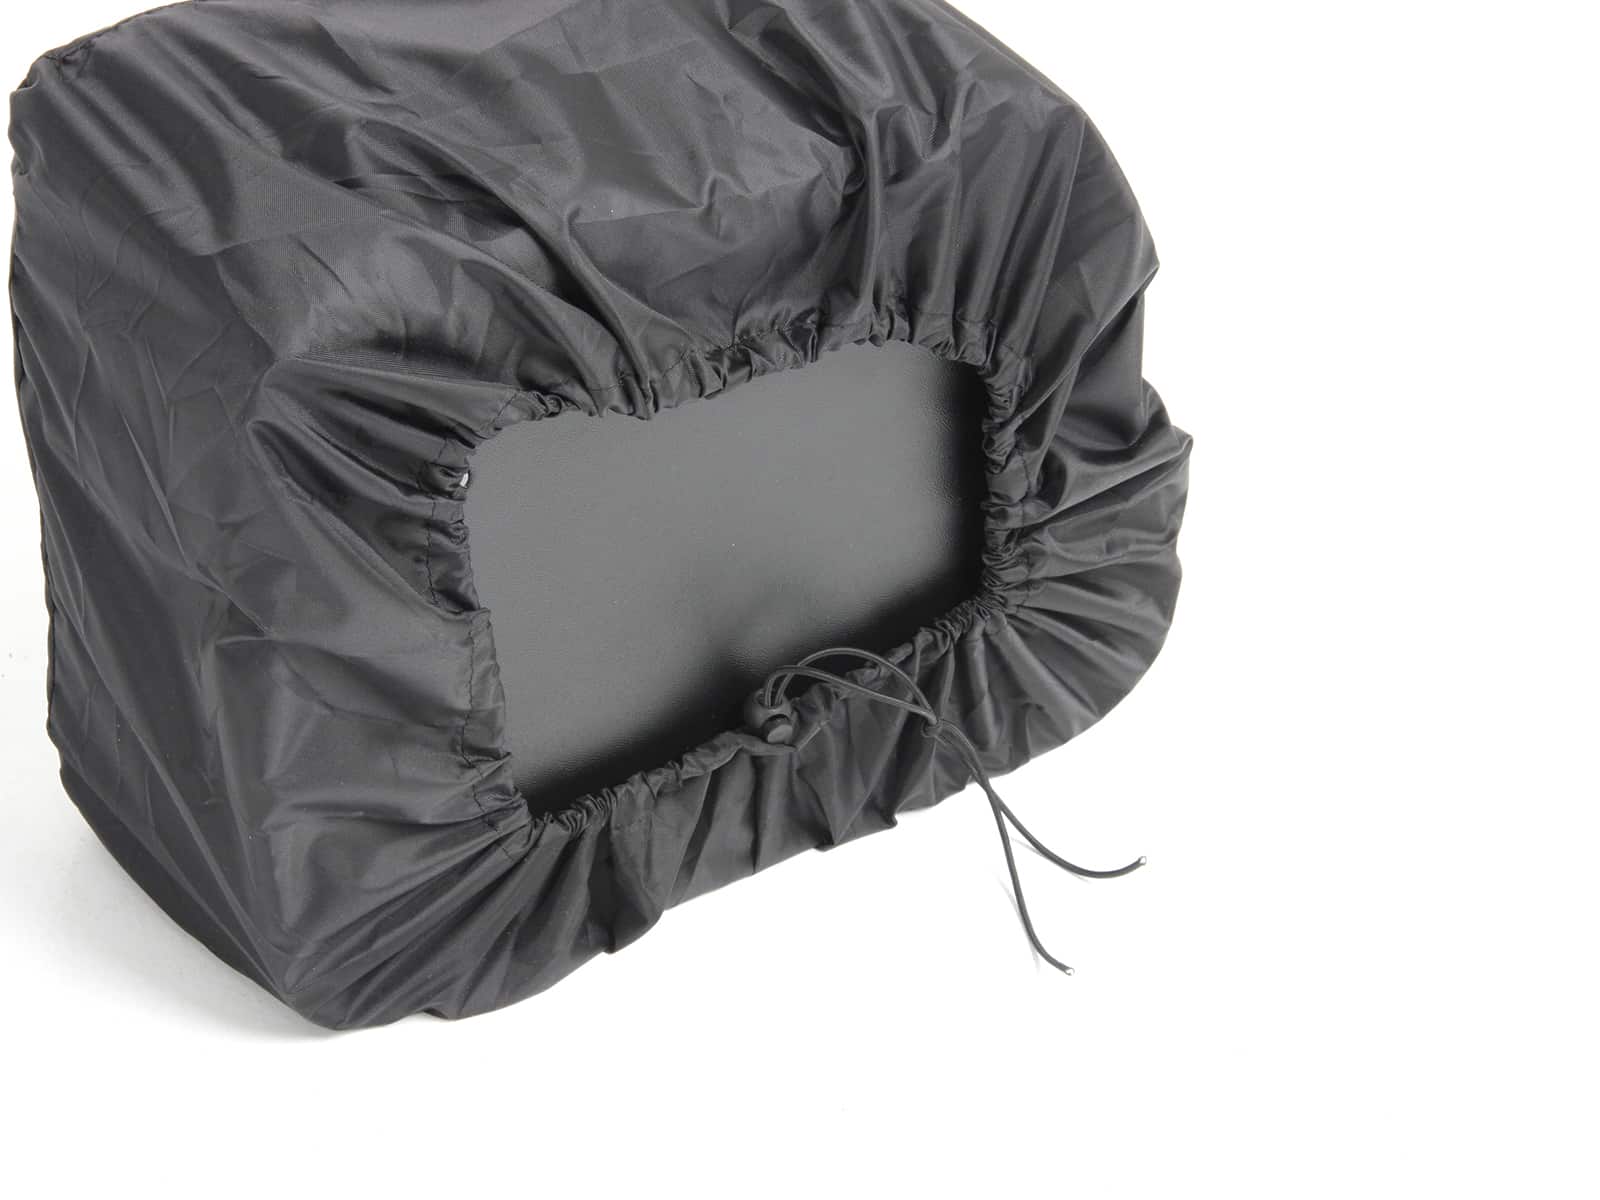 Rain cover for Rugged leather bags (set)